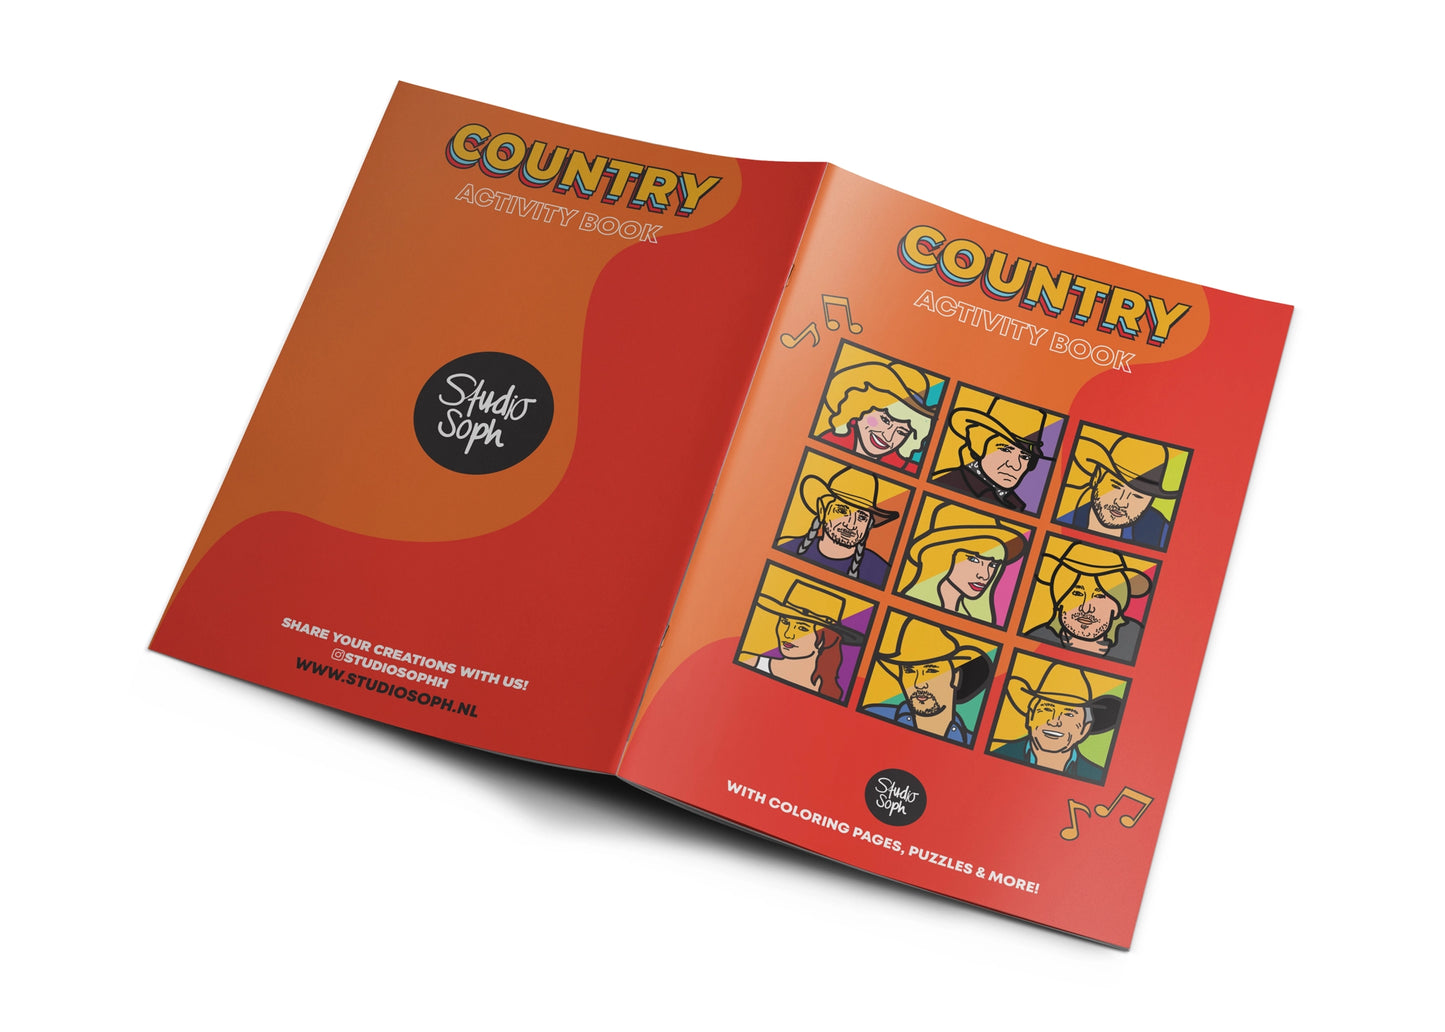 Country Activity Book